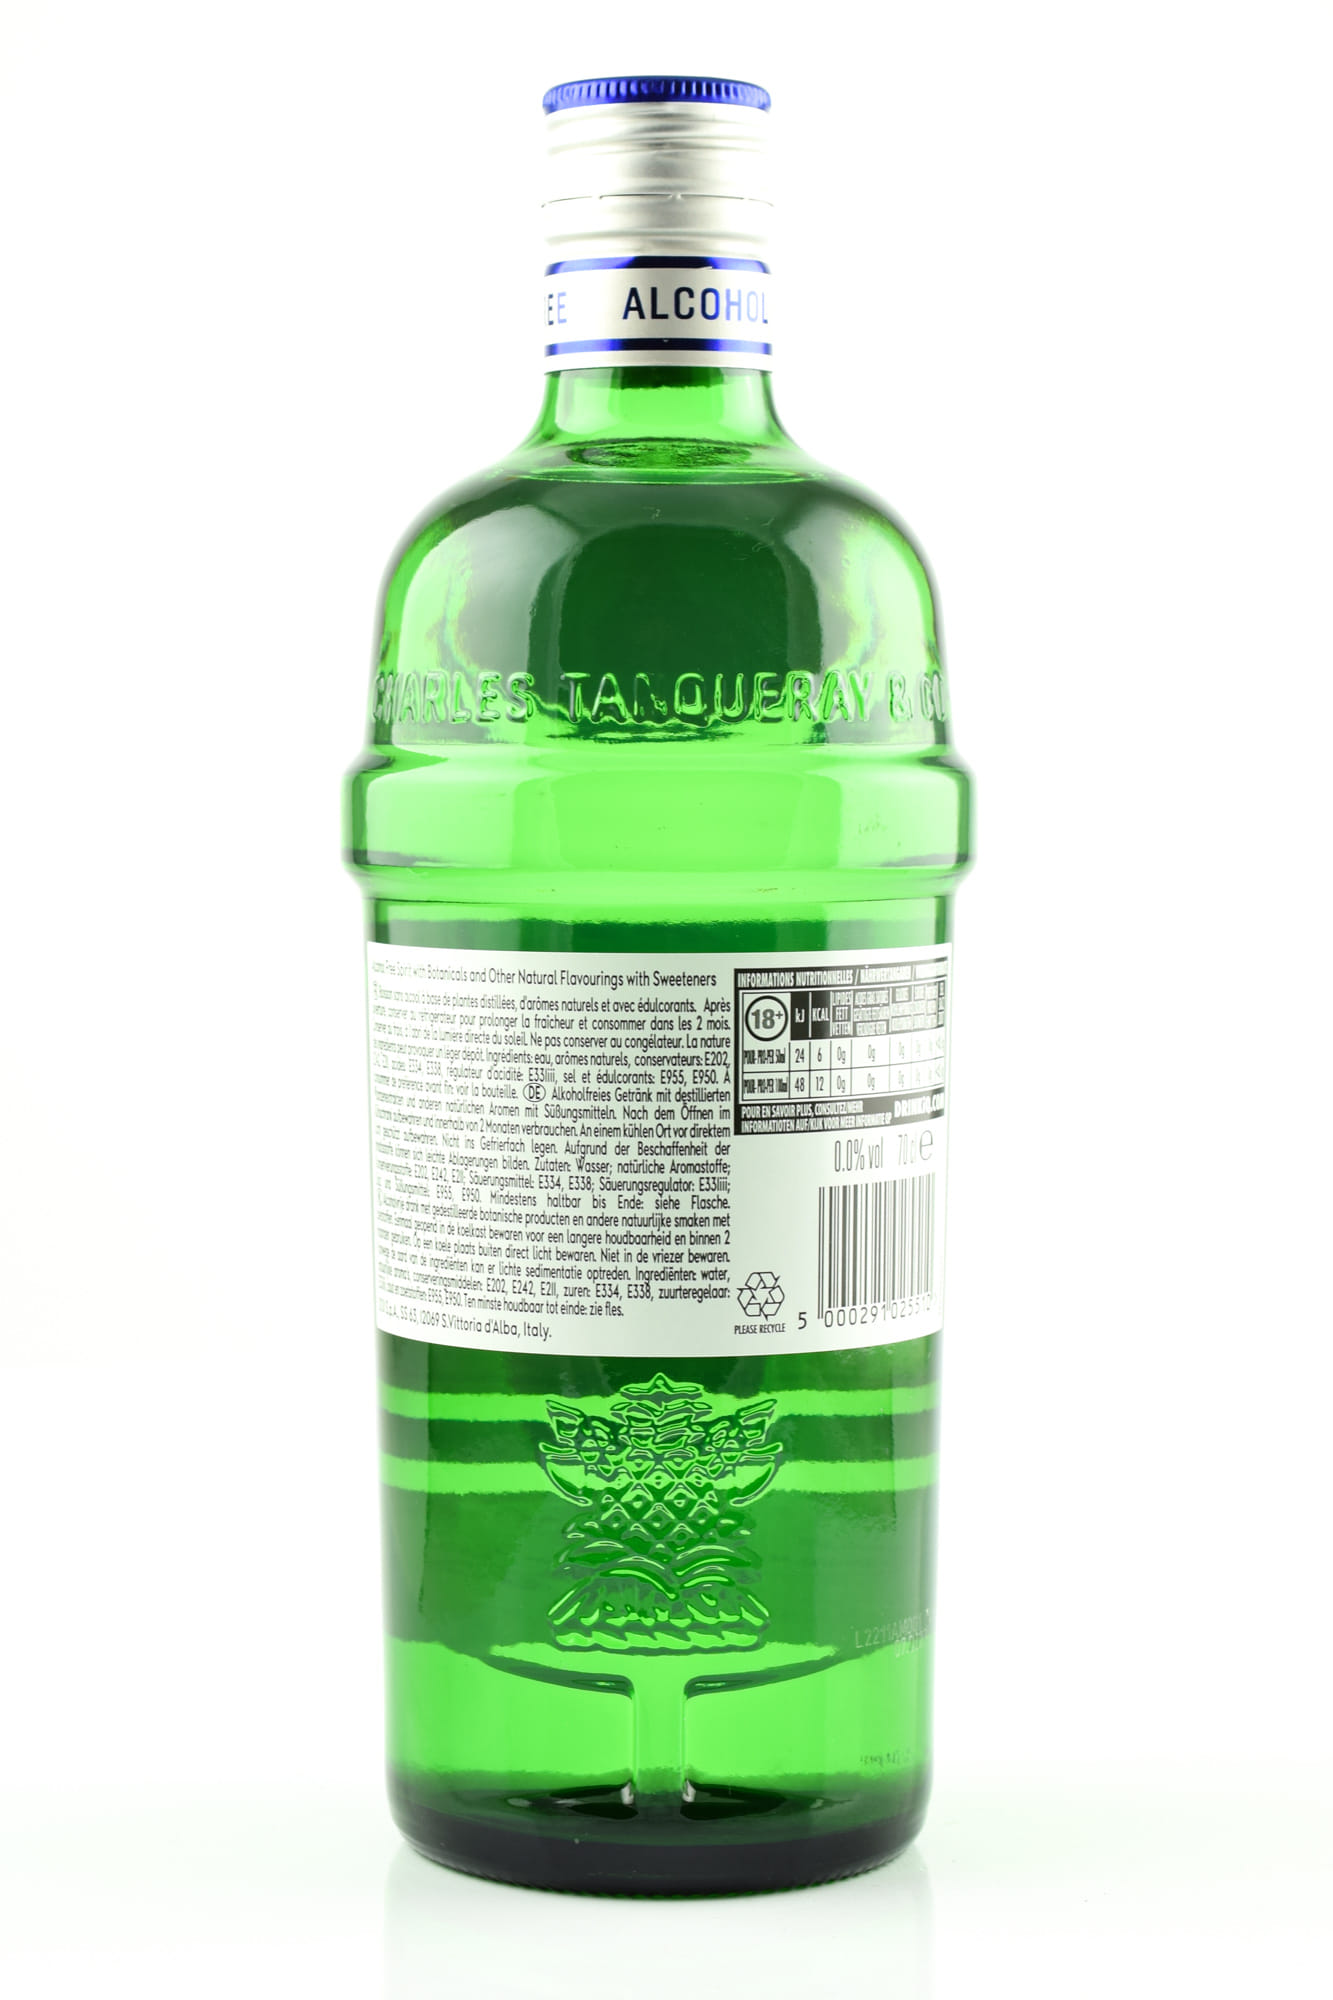 Home at Malts >> alcohol explore Malts free 0,0 of of | now! Home Tanqueray